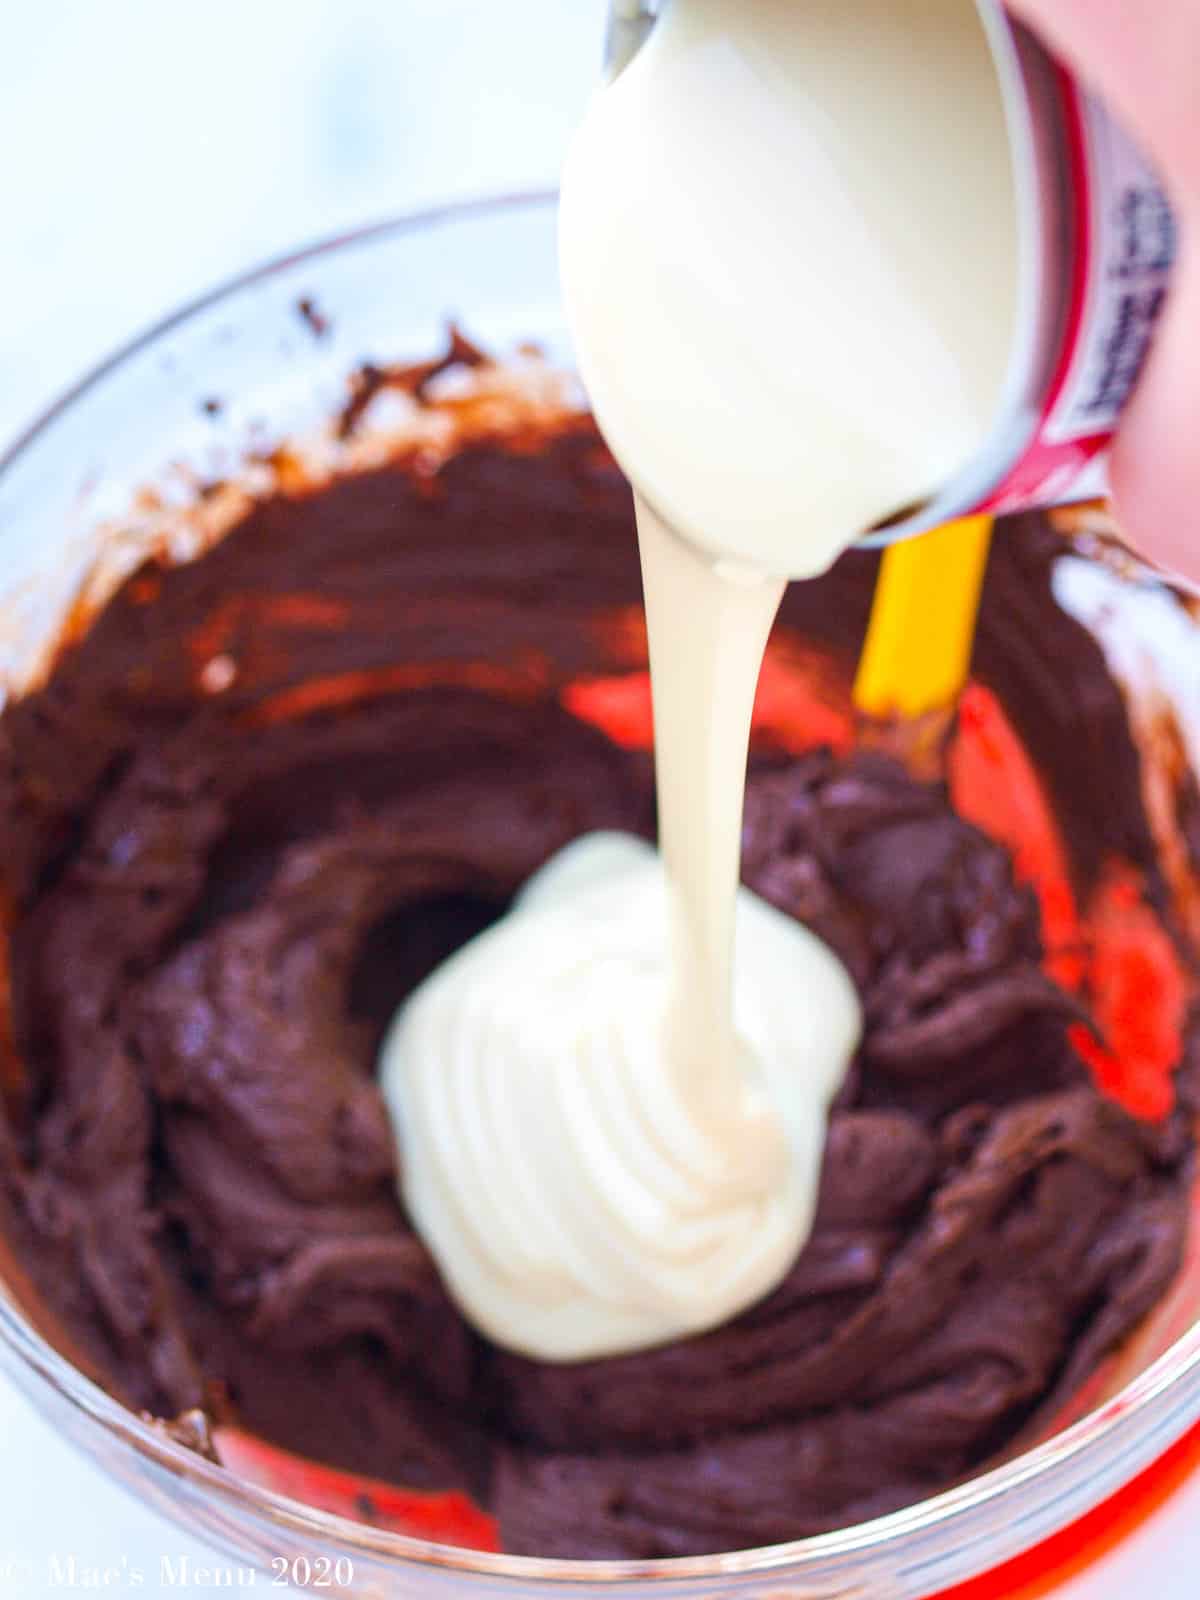 Pouring sweetened condensed milk into a bowl of melted chocolate